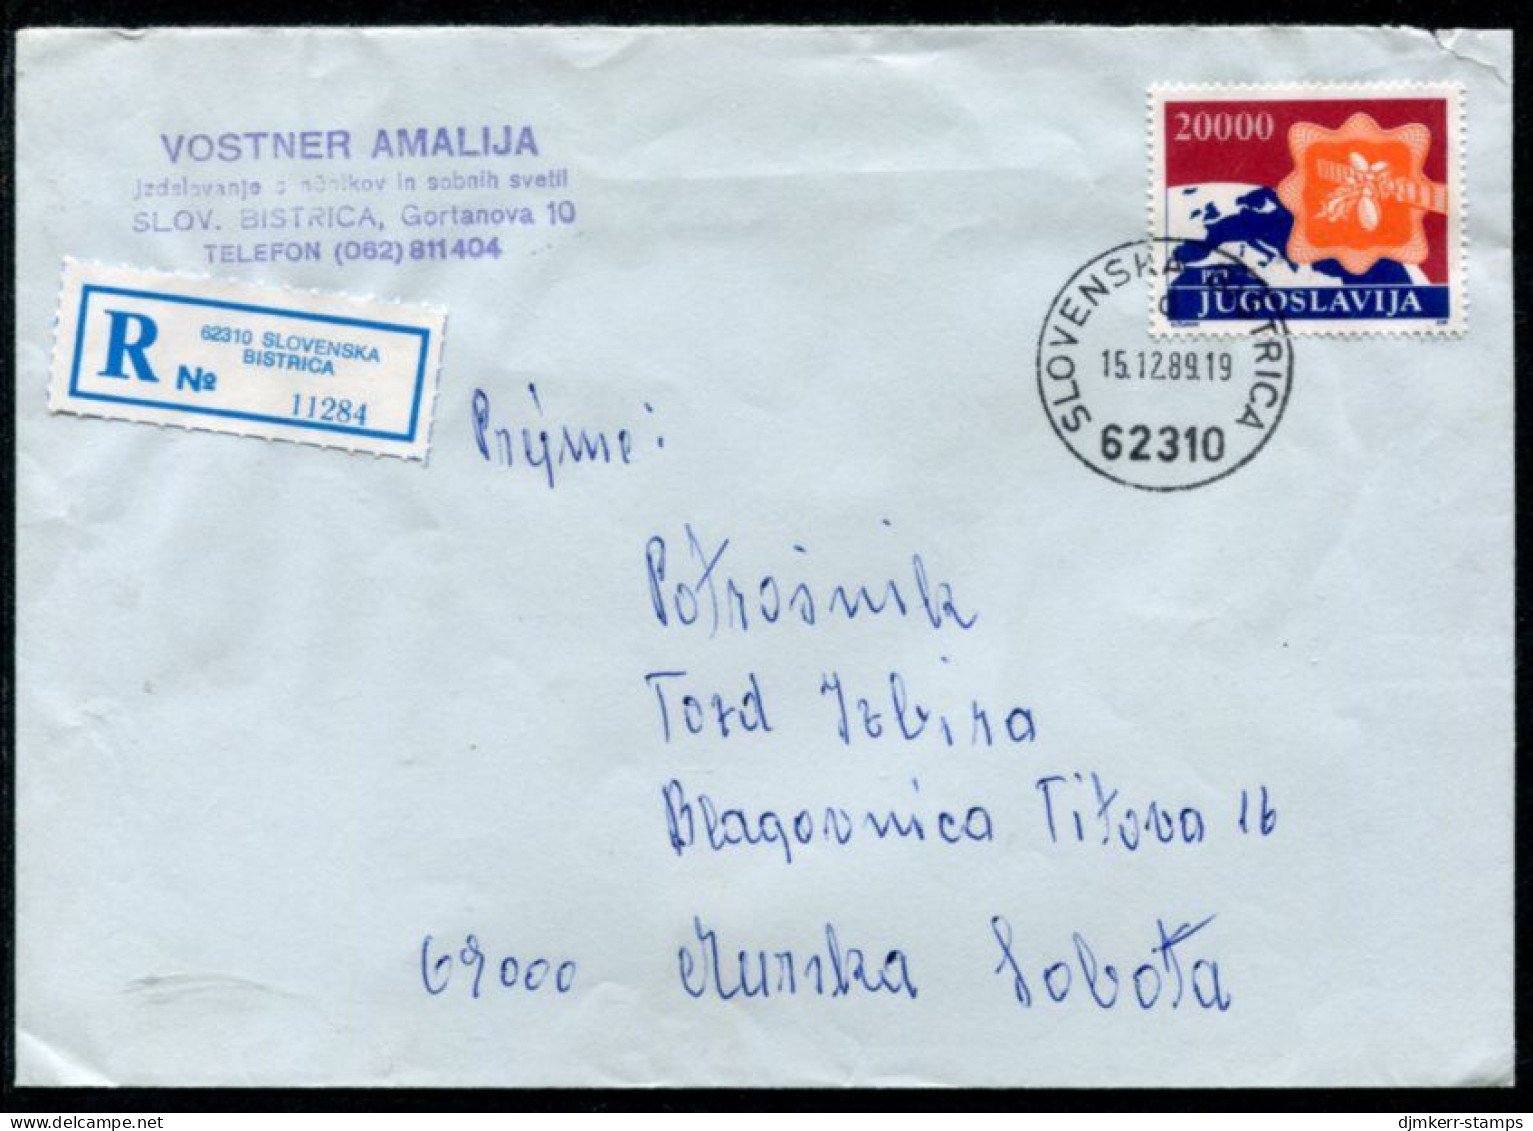 YUGOSLAVIA 1989 Registered Cover Franked With Postal Services 20000 D Single Franking    Michel 2362 - Covers & Documents